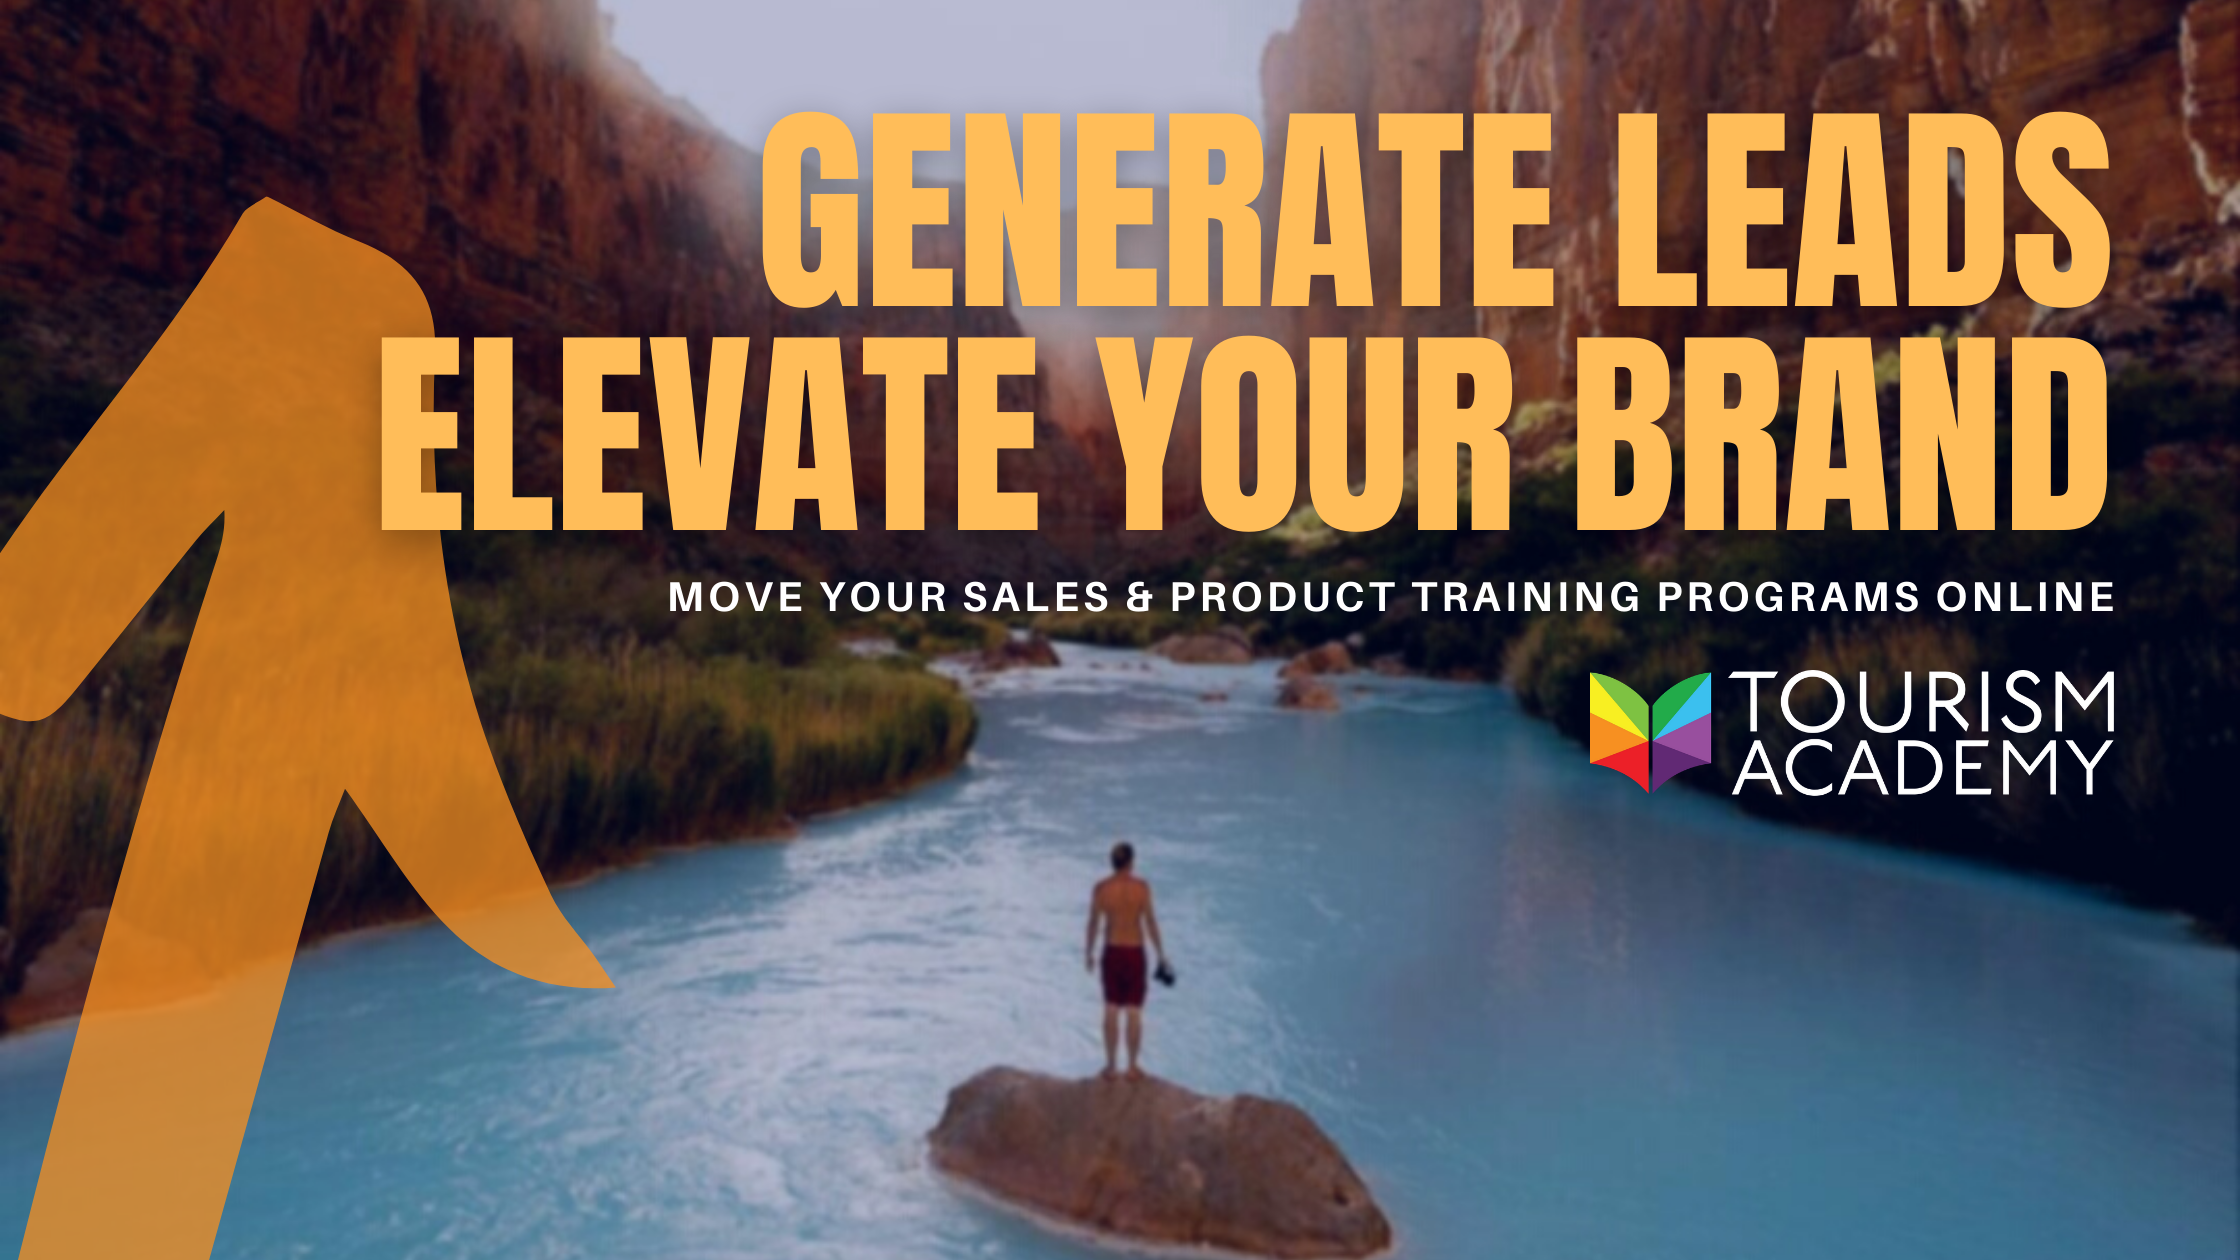 online product training & destination sales opportunities